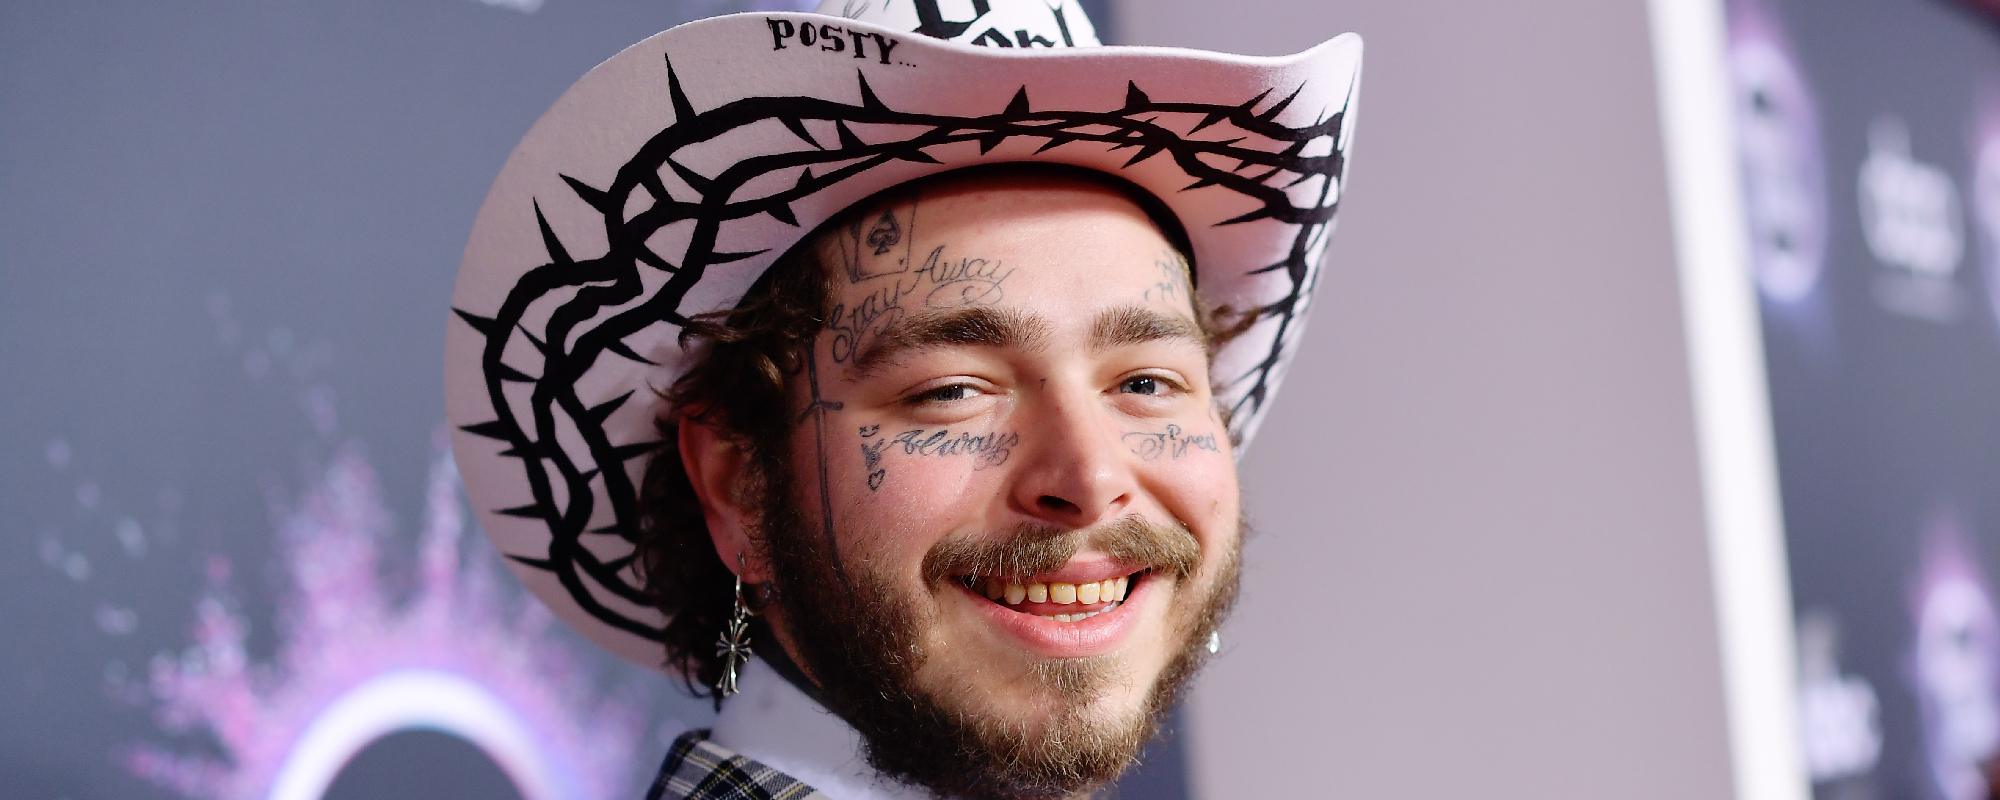 Post Malone Surprises Fans at the Ryman Auditorium With Cover of Hank Williams’ “Honky Tonk Blues”